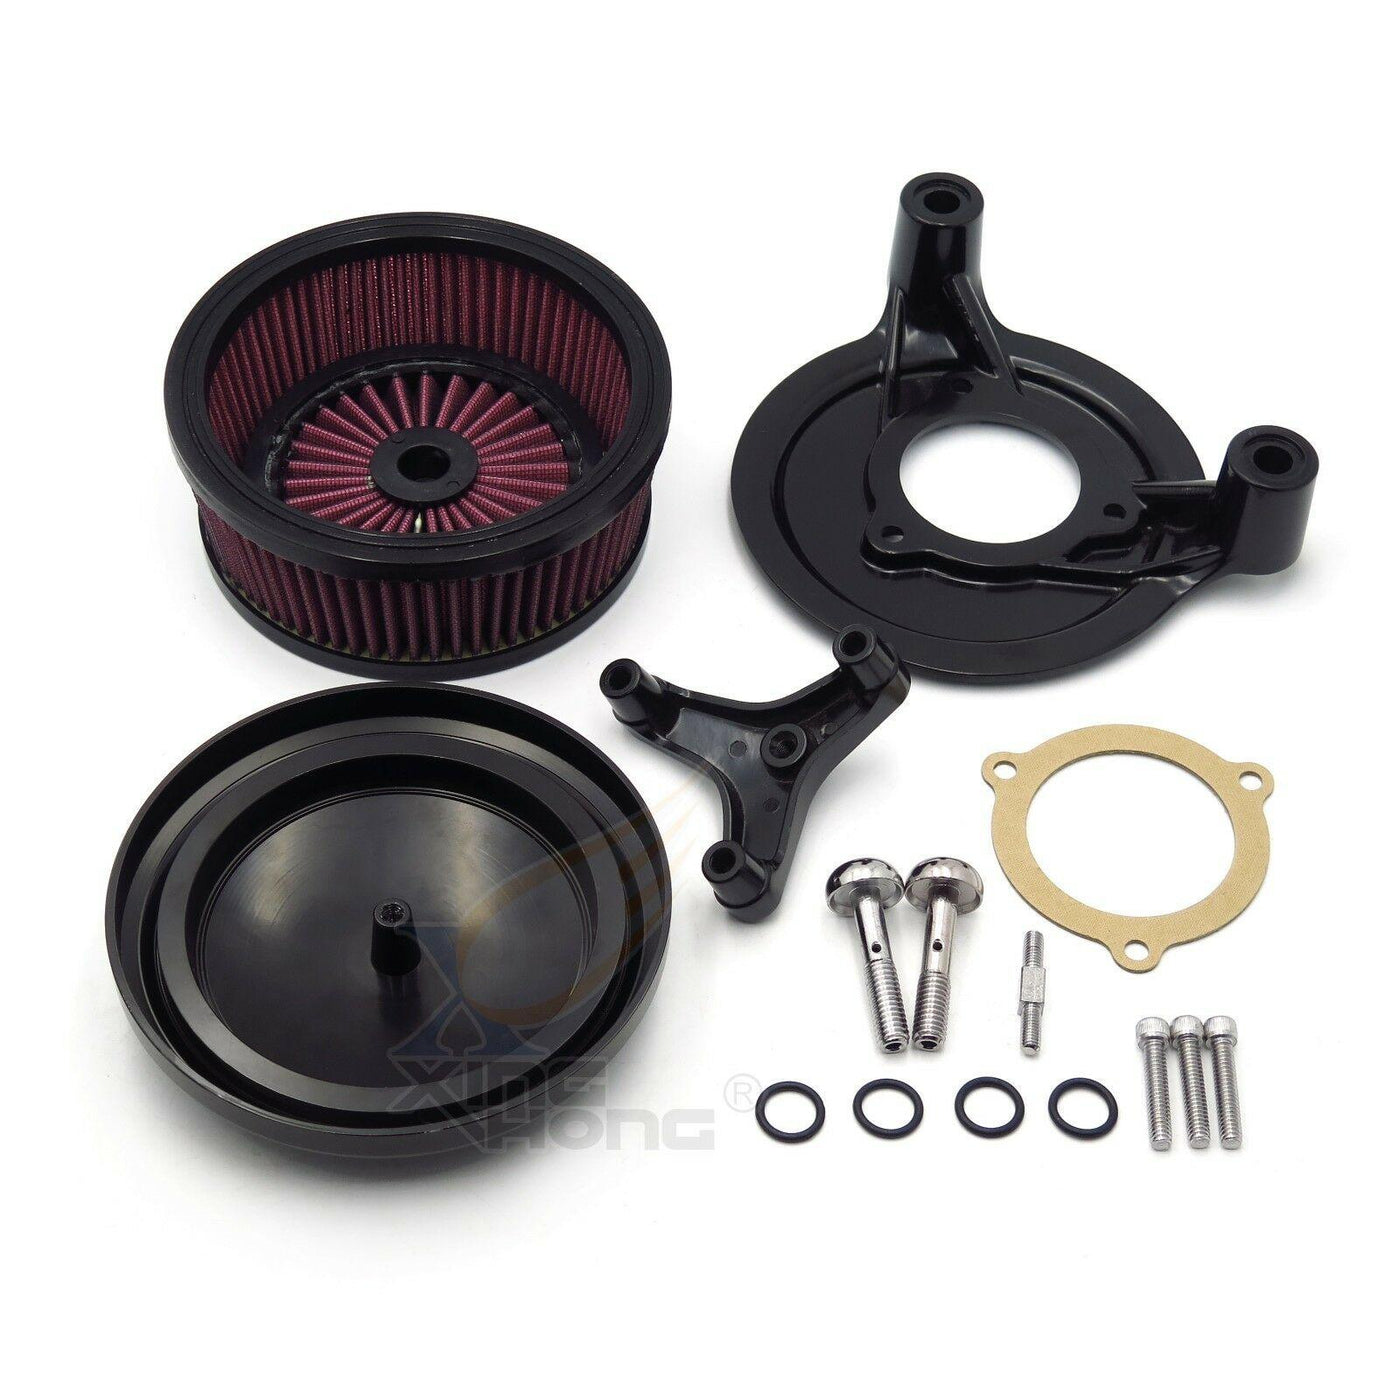 Motorcycle Black Air Cleaner Intake Filter System Kit For Harley Touring 08-UP - Moto Life Products